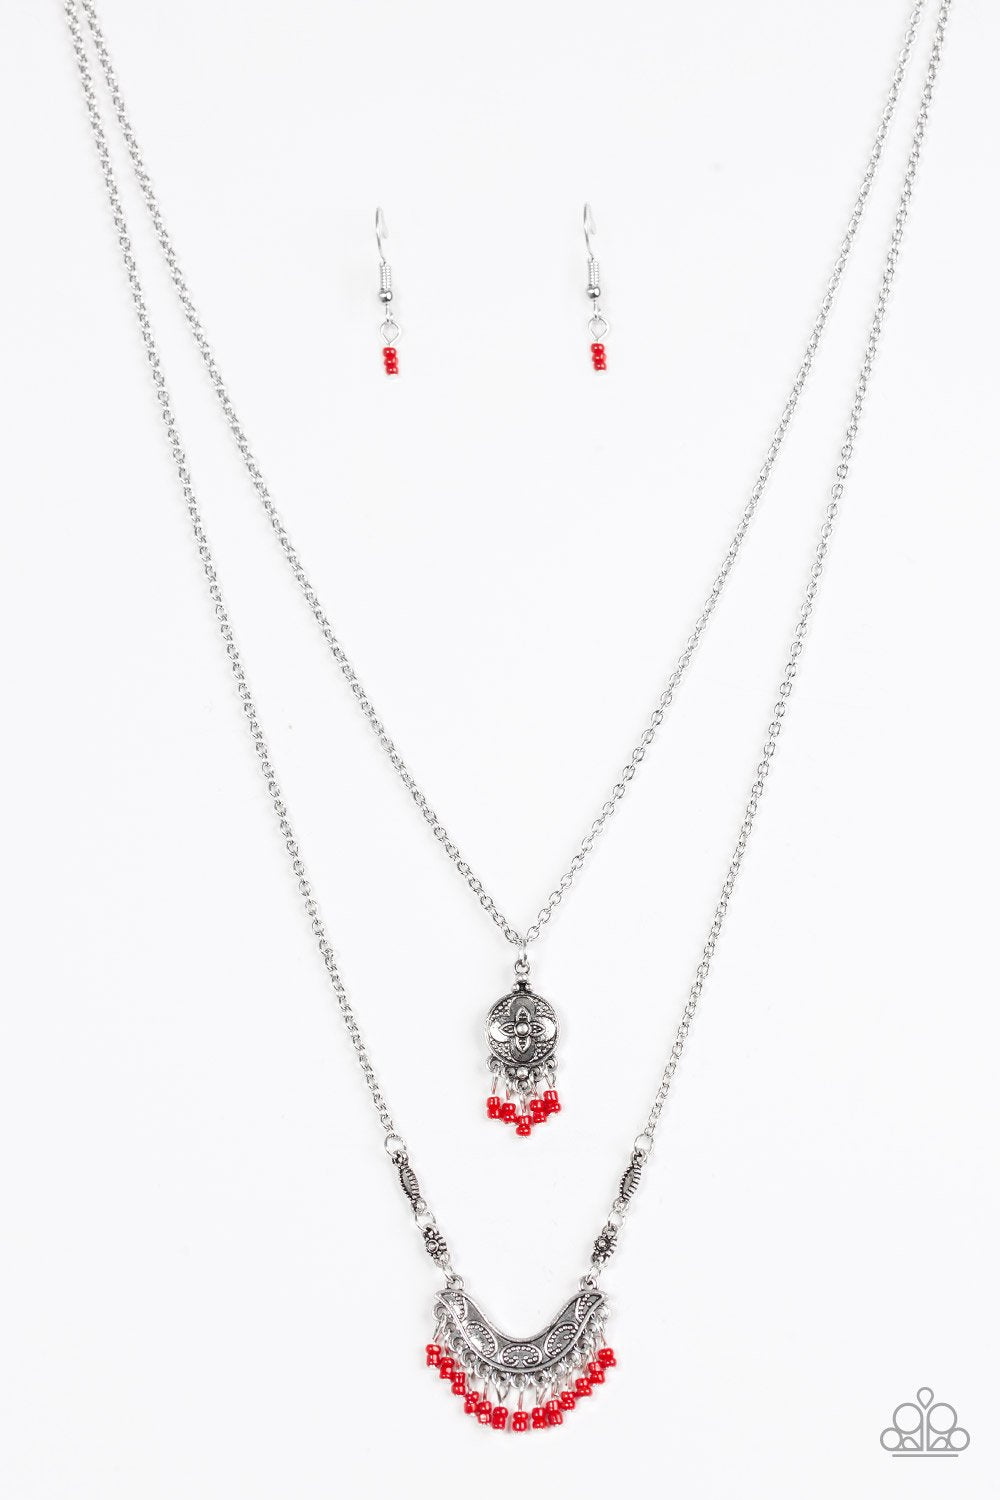 Paparazzi Necklace ~ Bohemian Belle - Red